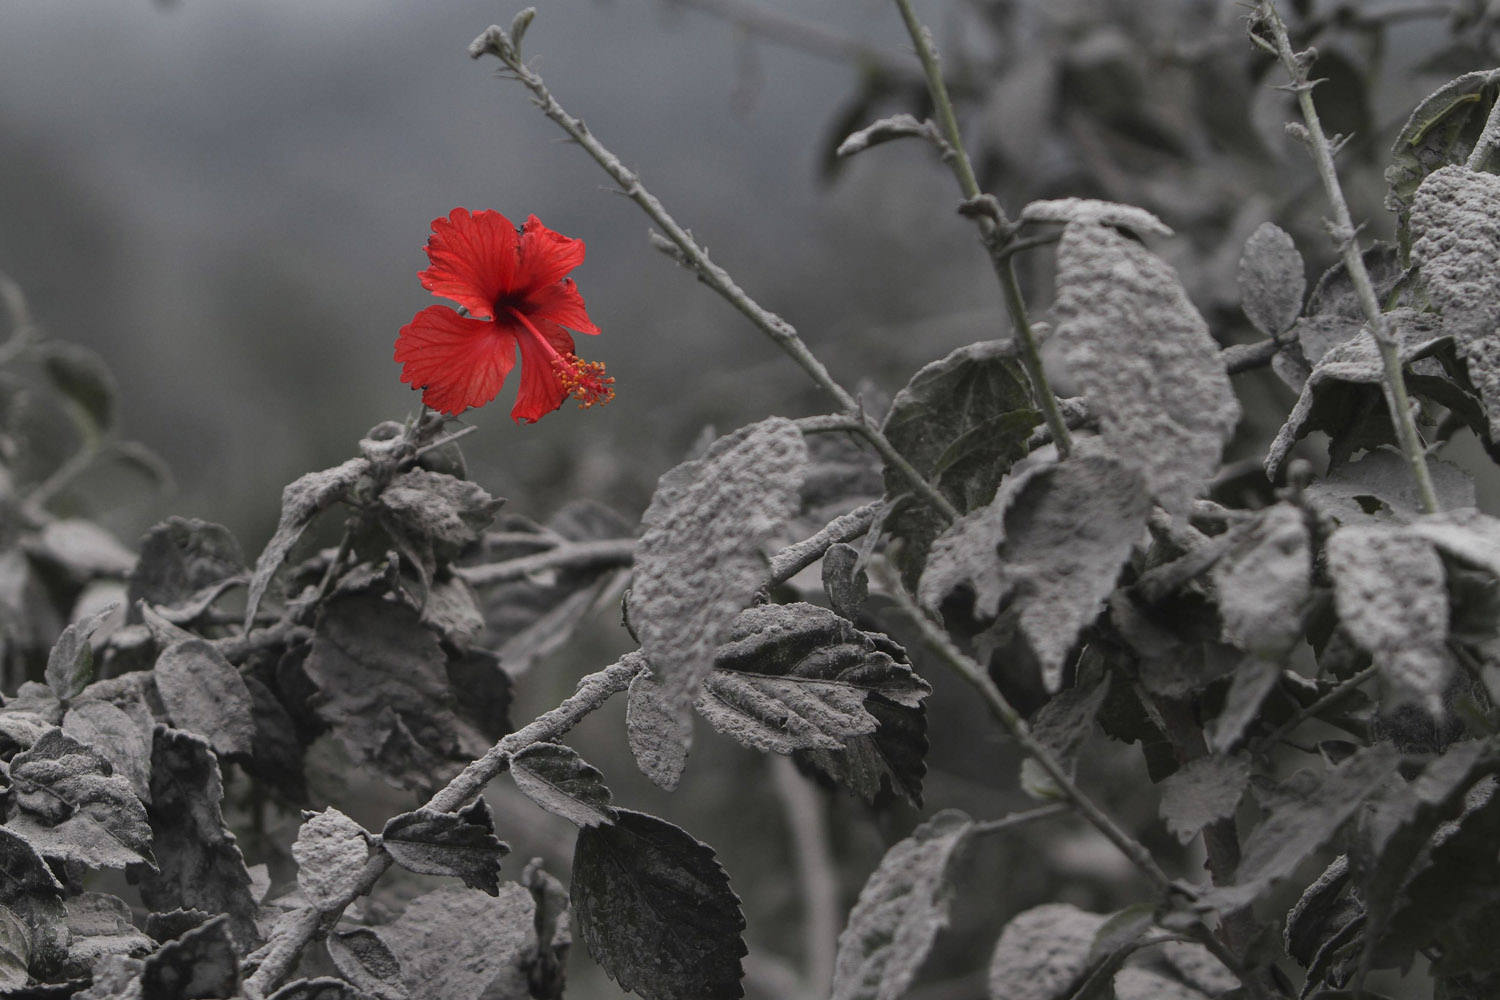 Nov. 19, 2013. A hibiscus flower is seen on an volcanic ash-covered plant at Mardingding village in Karo district, Indonesia's north Sumatra province.